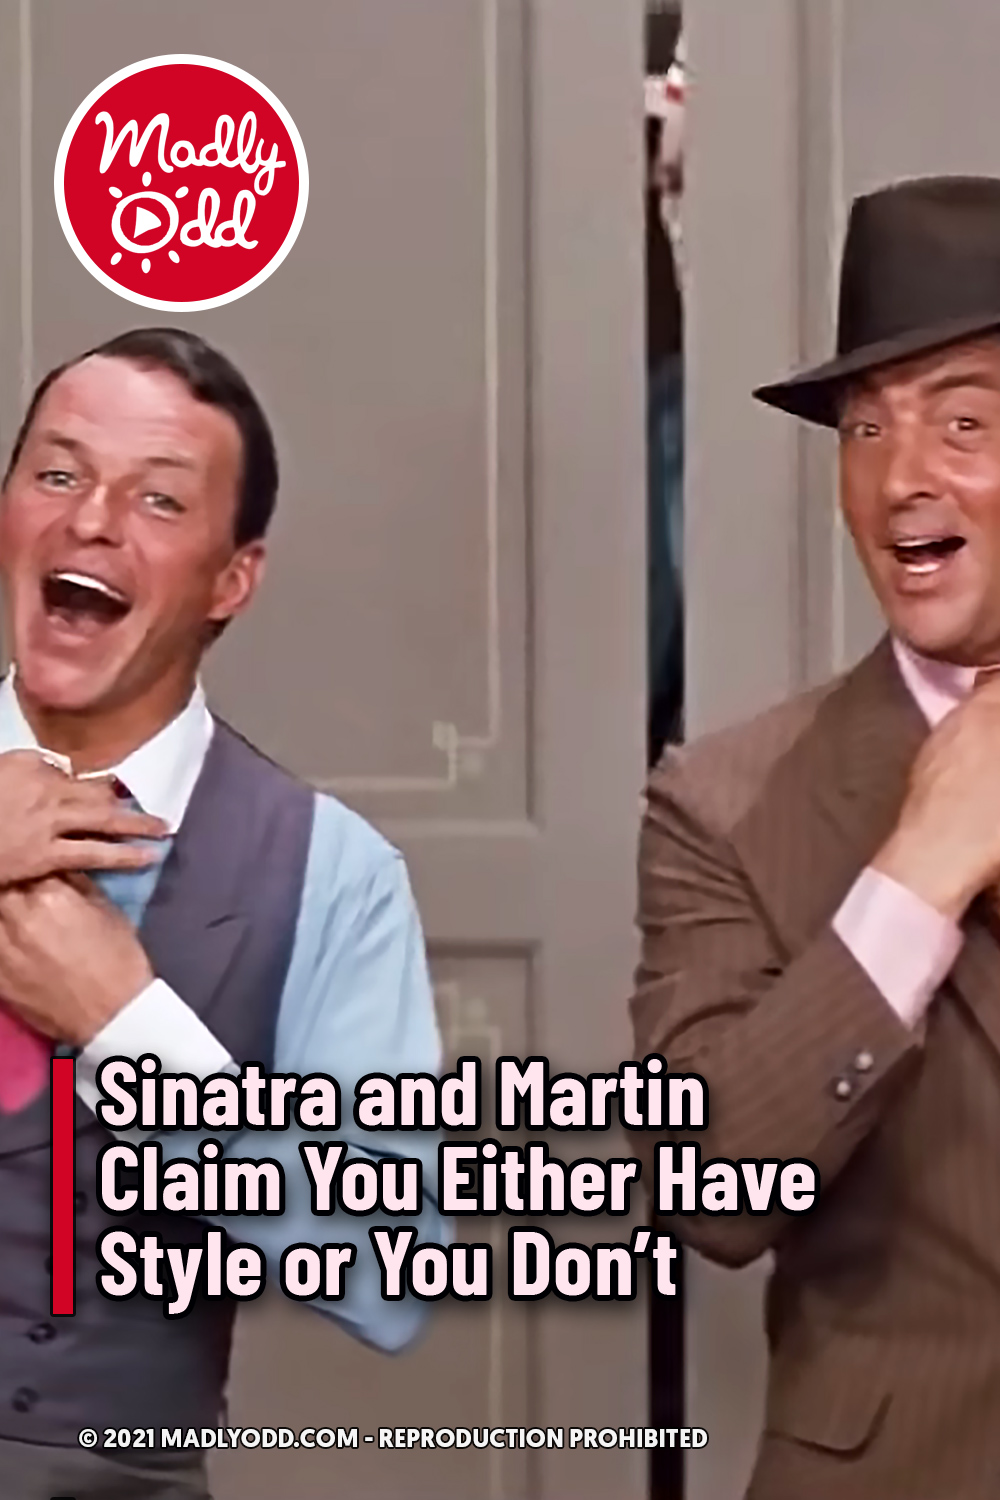 Sinatra and Martin Claim You Either Have Style or You Don’t